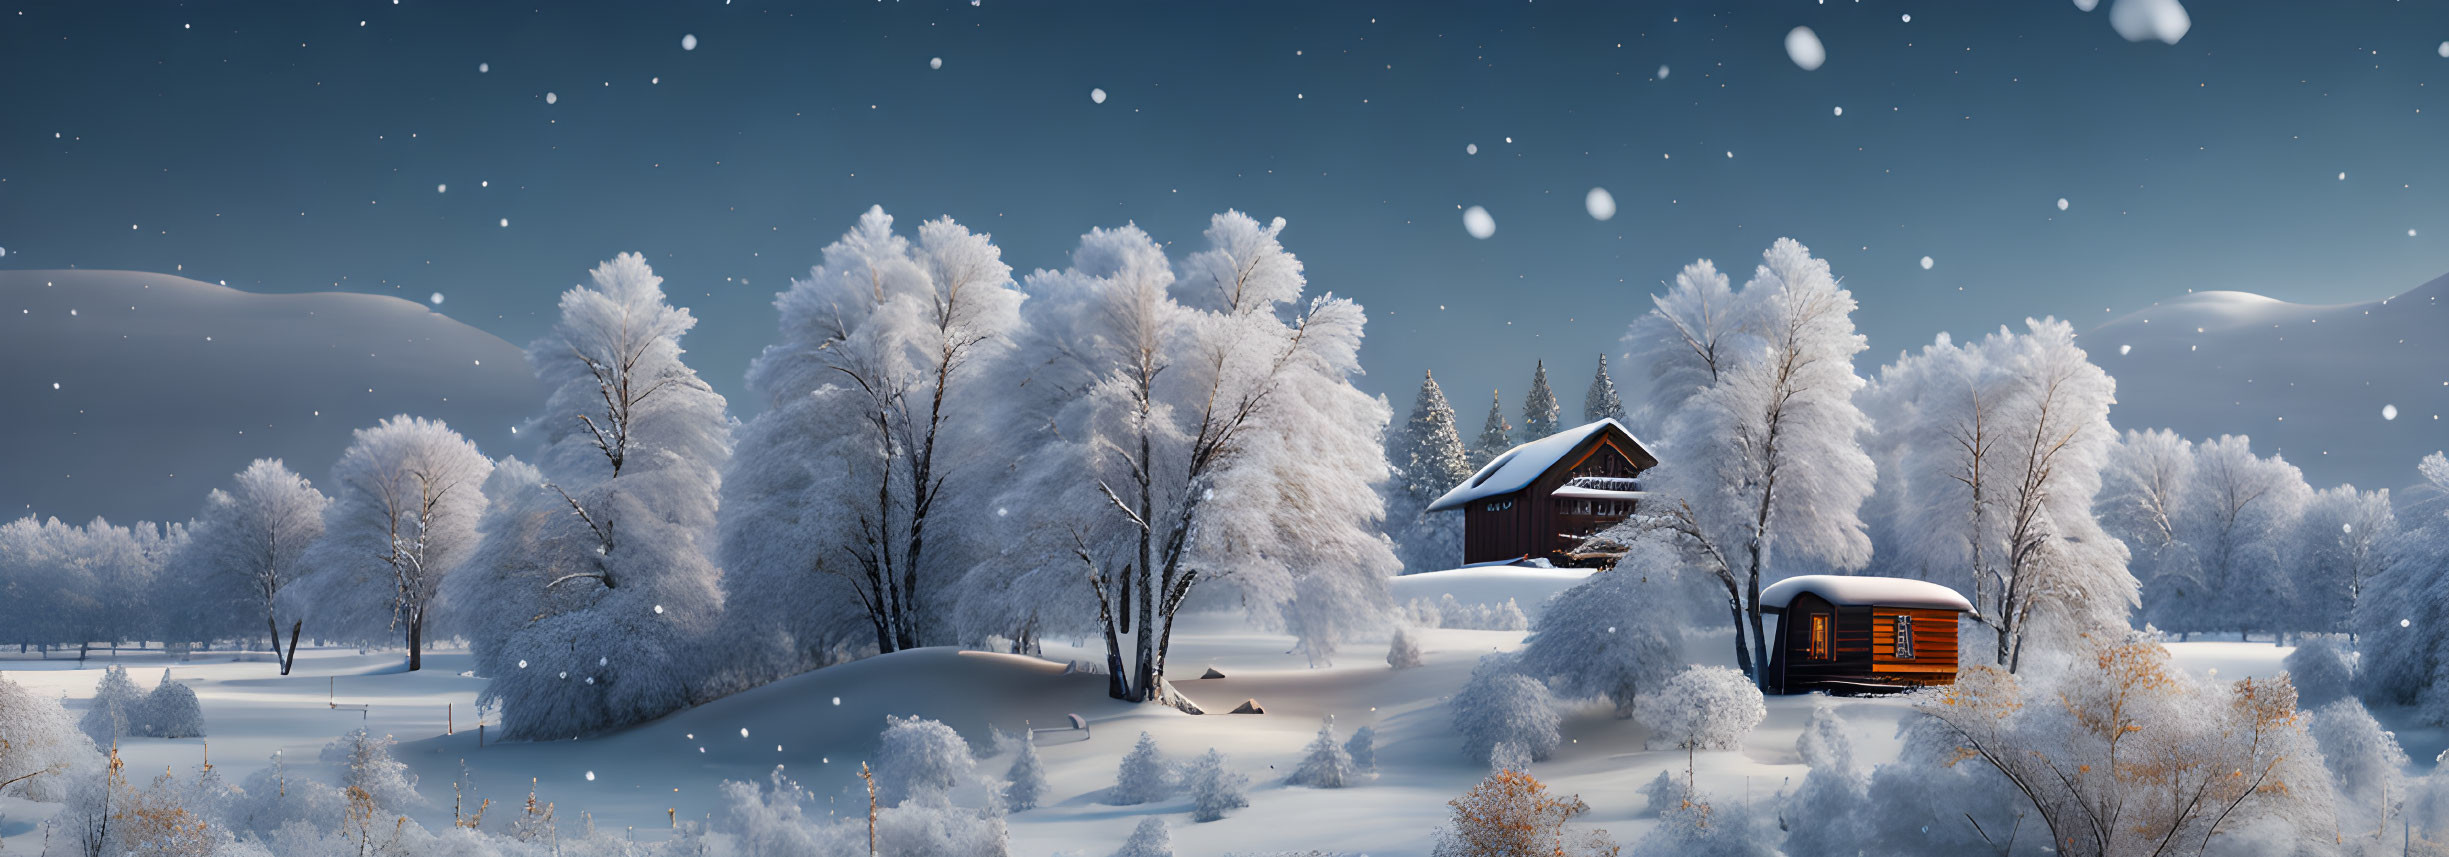 Snowy Winter Landscape with Cabin and Falling Snowflakes